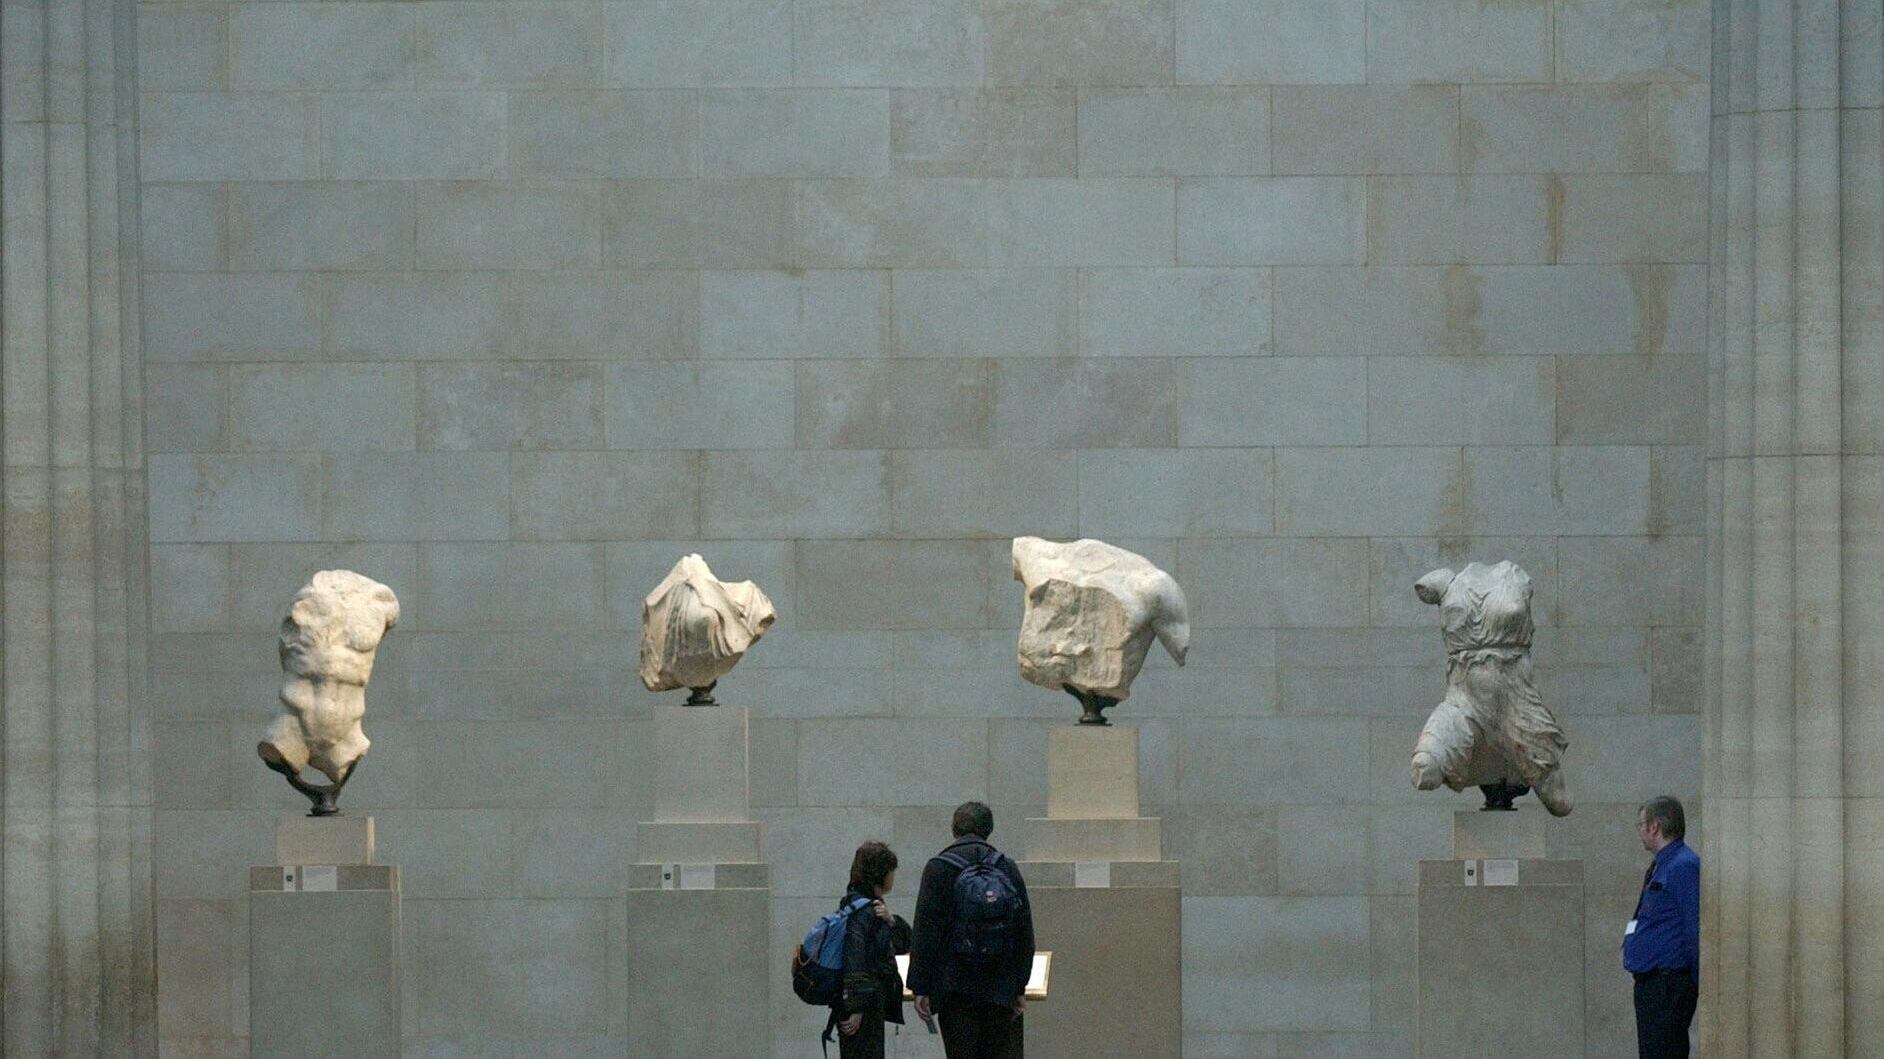 Sections of the Parthenon Marbles, also known as the Elgin Marbles, in London’s British Museum (Matthew Fearn/PA)